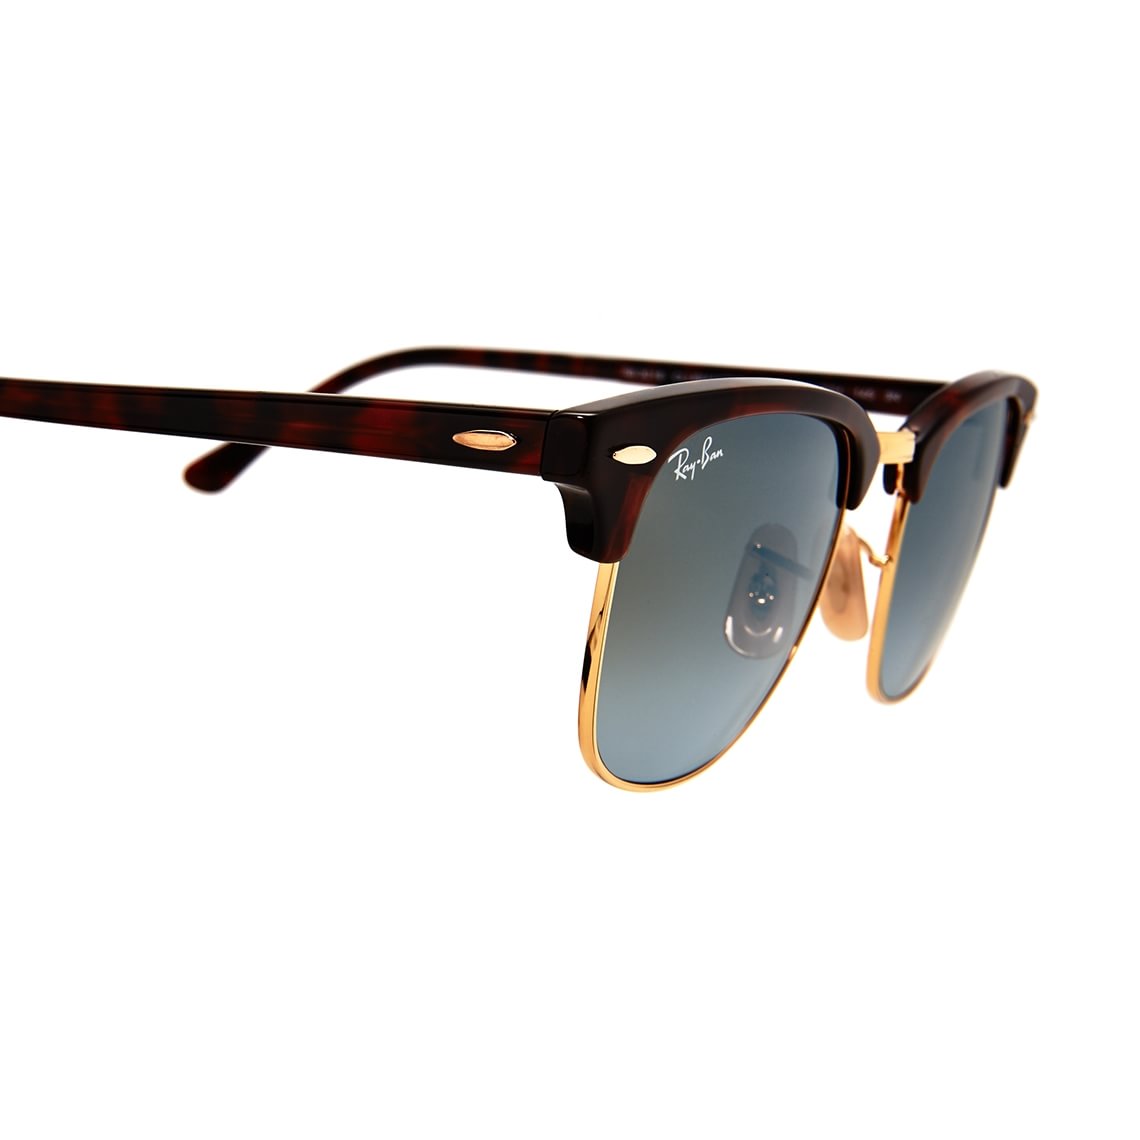 Ray-Ban Clubmaster RB3016 990/9J 51